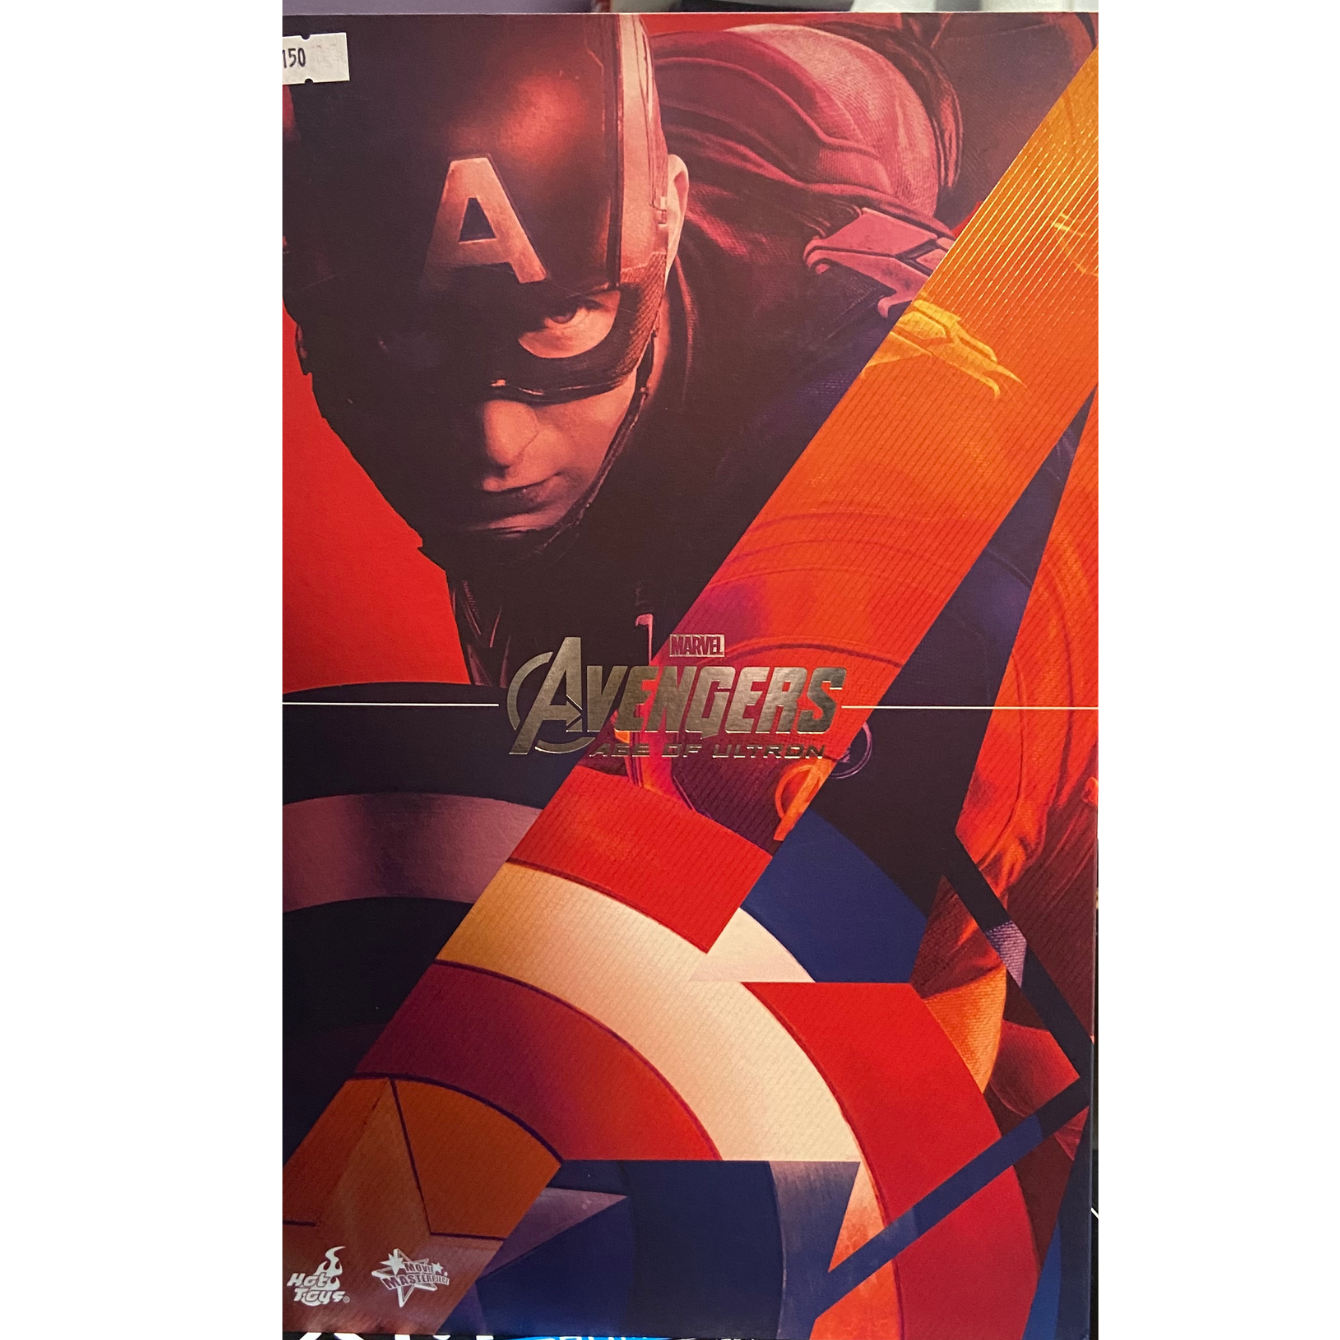 Captain America Avengers: Age of Ultron 1/6 scale collectible figure MMS 281